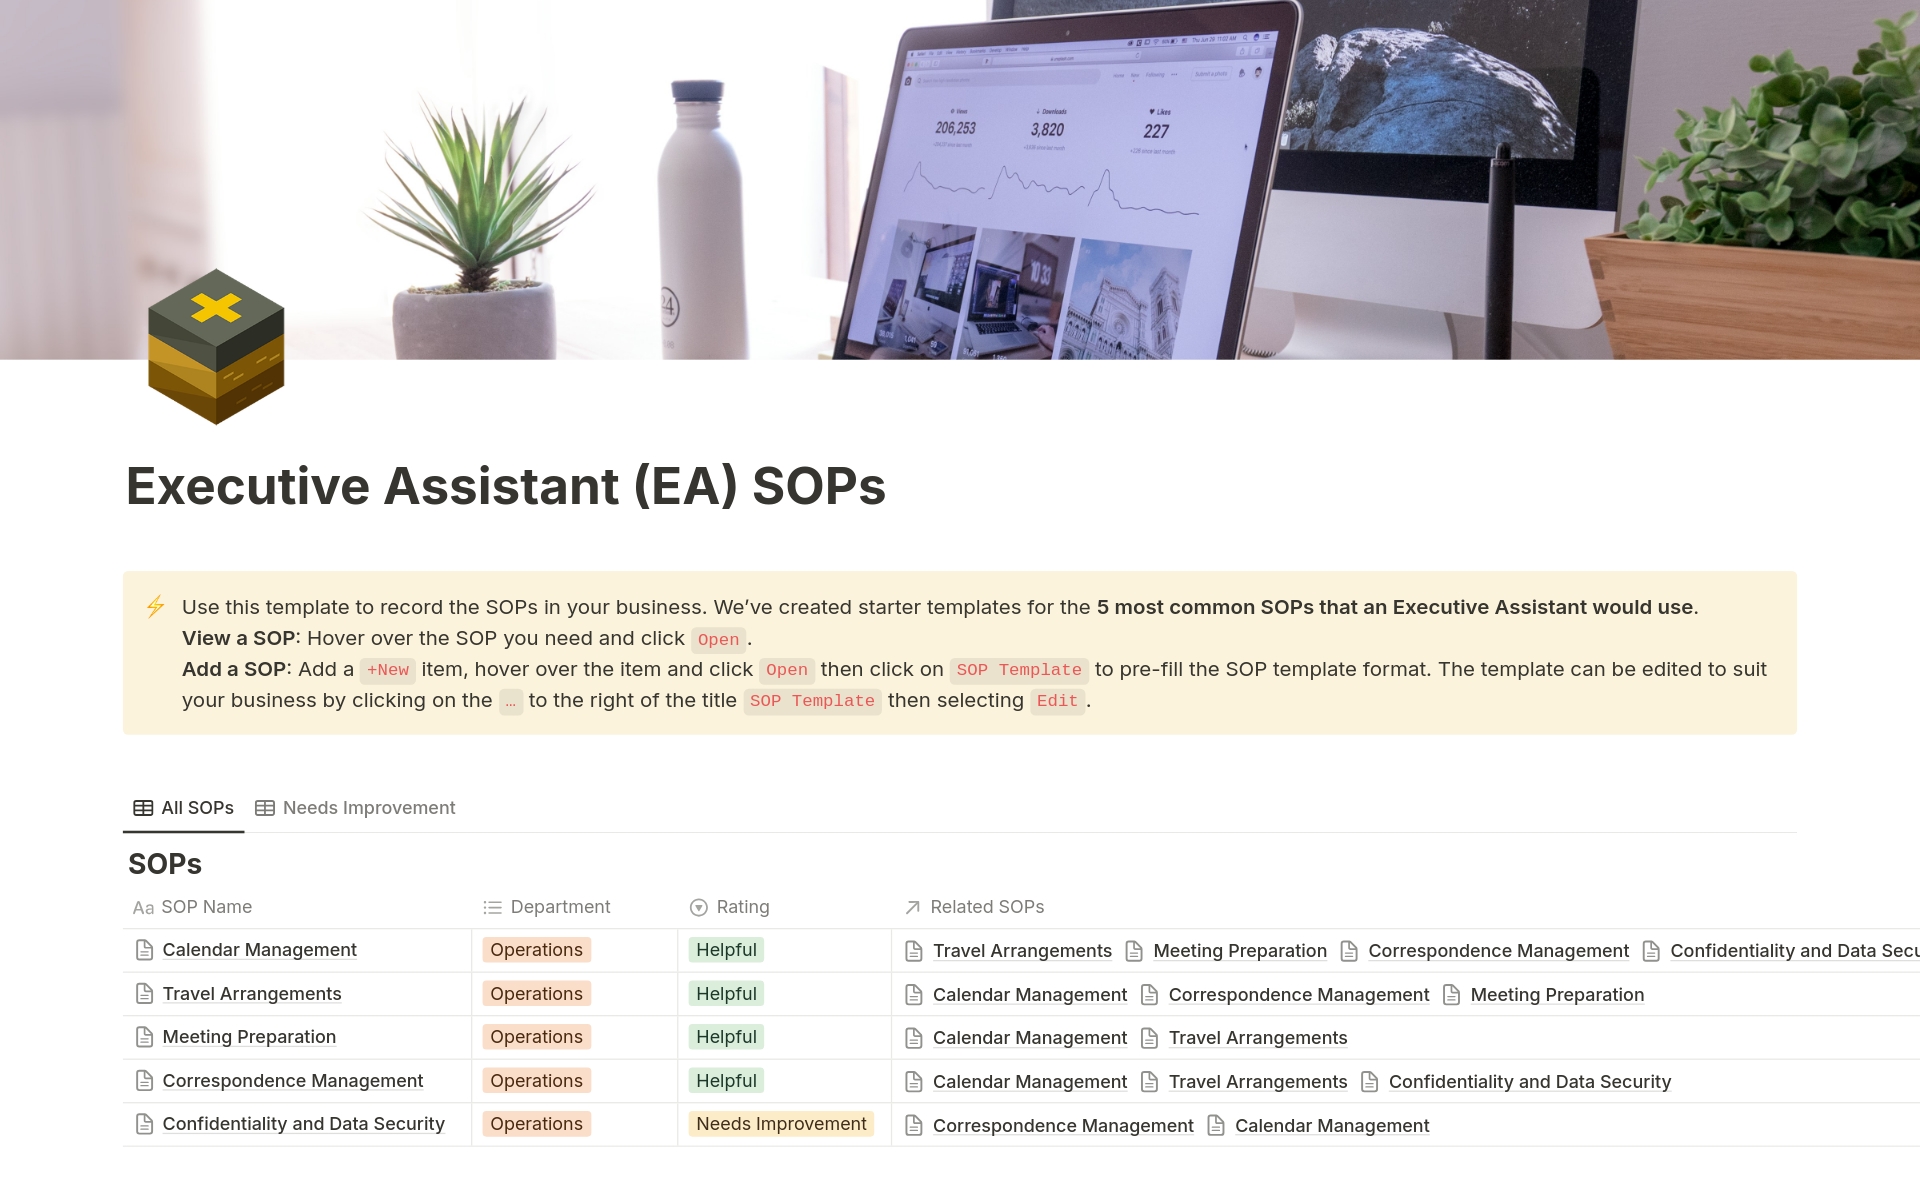 These standard operating procedures (SOPs) outline the essential tasks and responsibilities of an executive assistant. The SOPs cover calendar management, travel arrangements and more. Includes 20+ pages of best practice SOPs to save you 10+ hours of research.